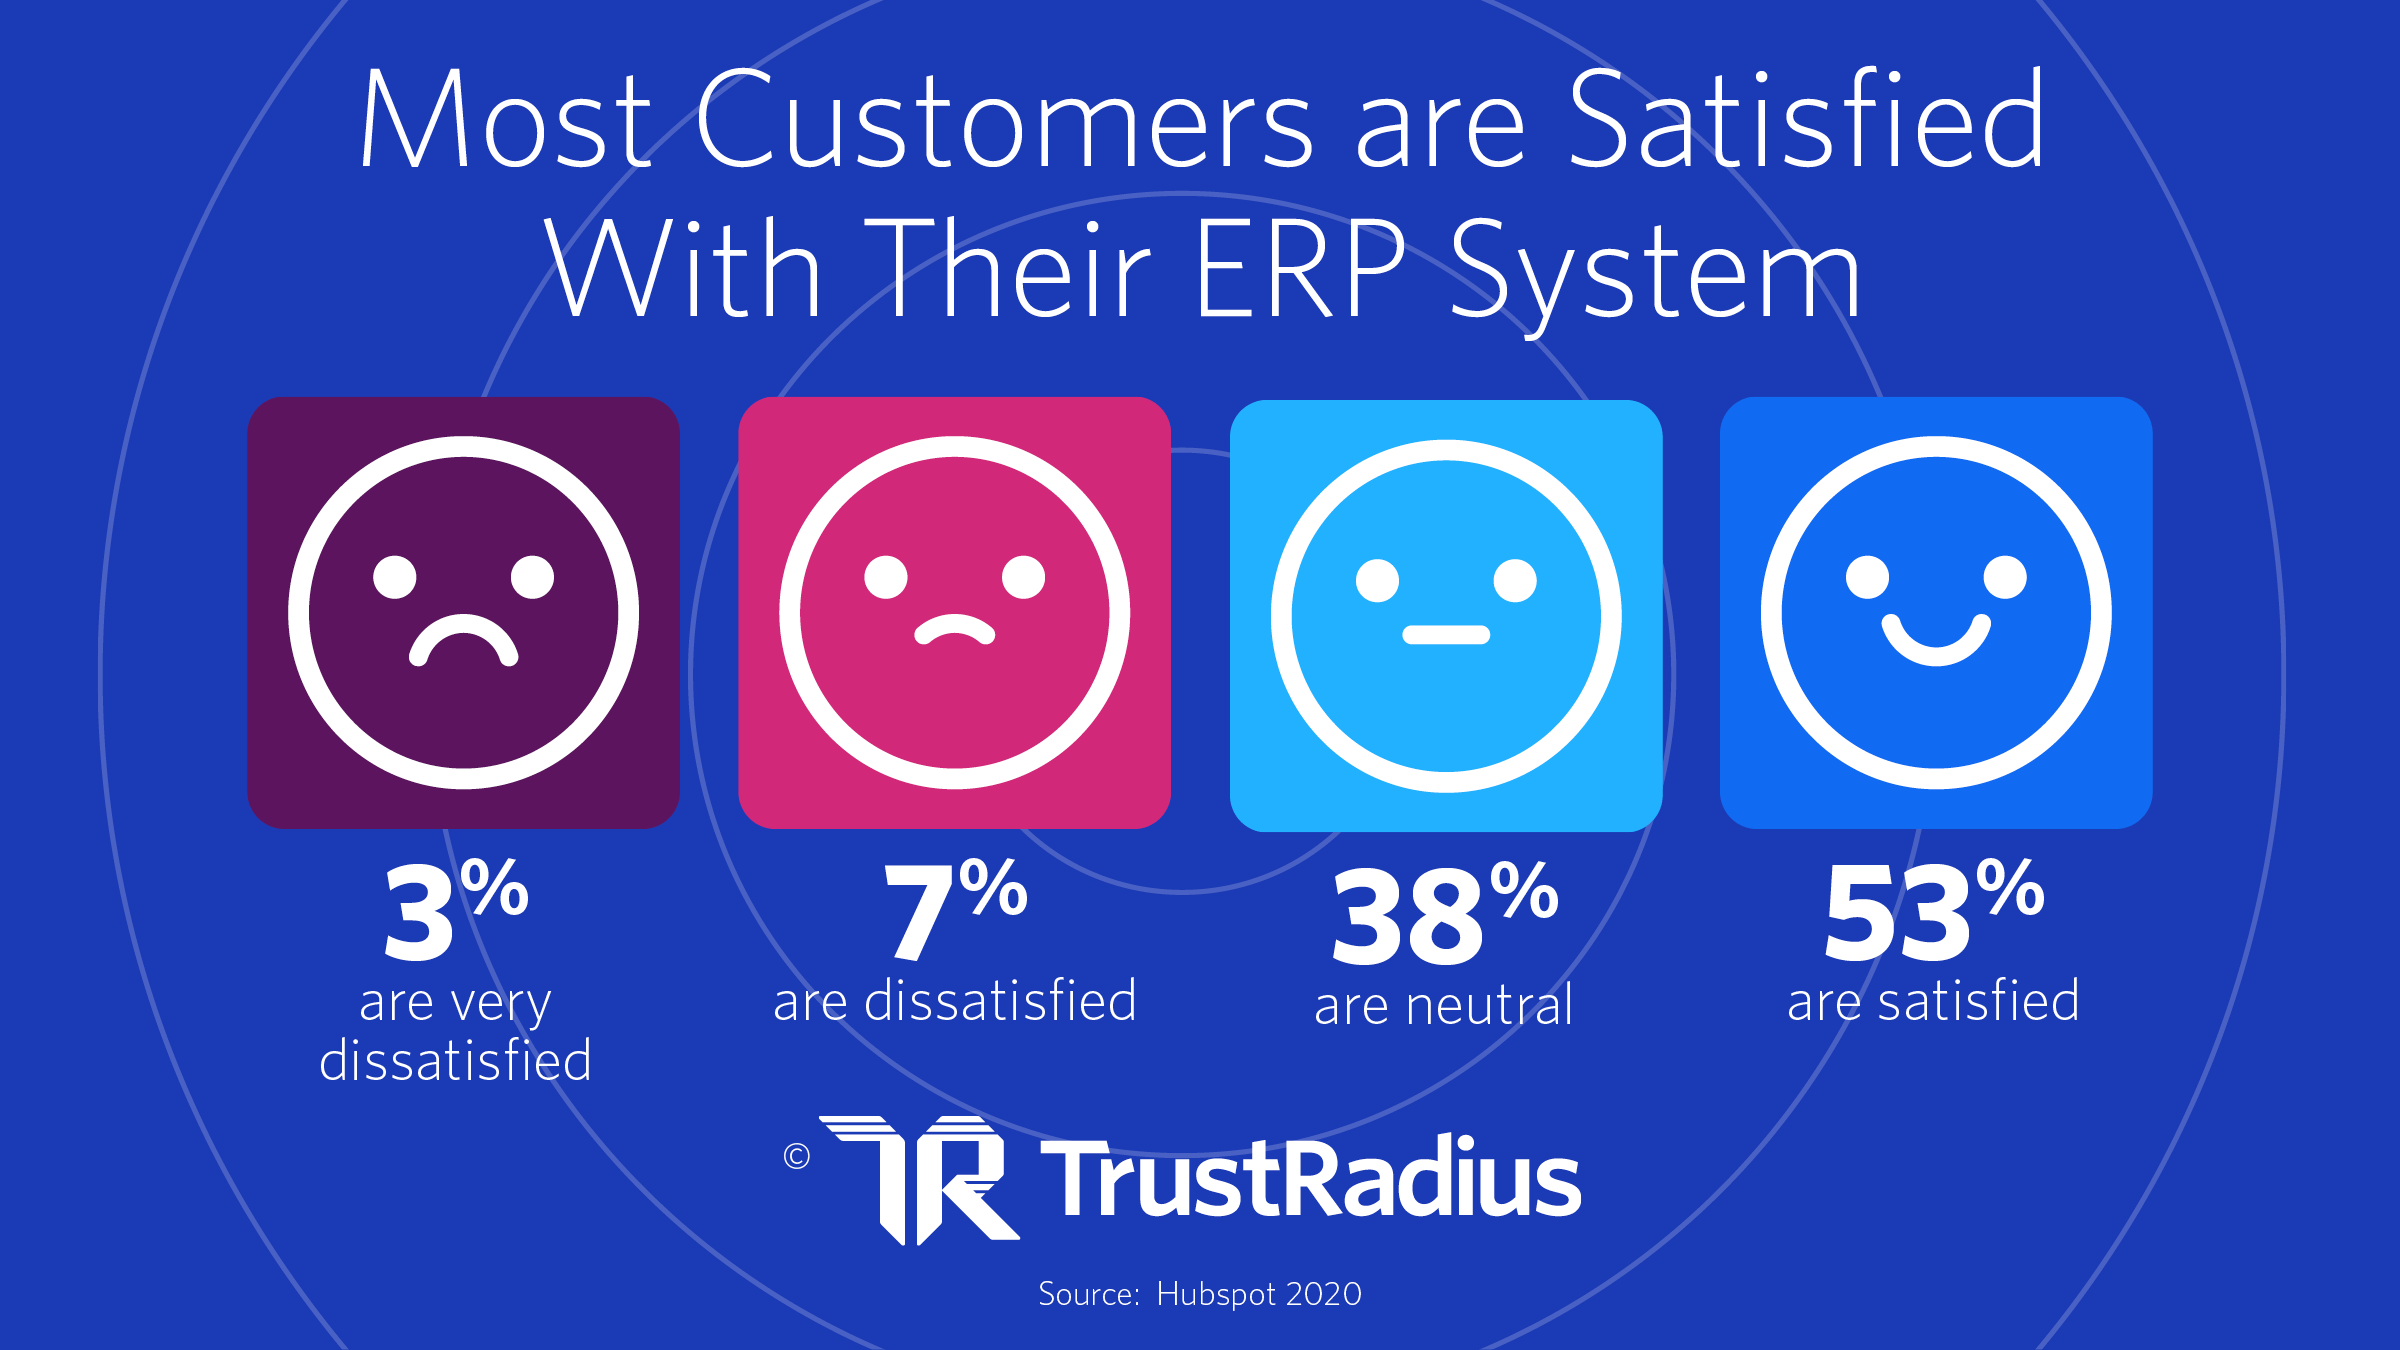 Most Customers are satisfied with their ERP systems